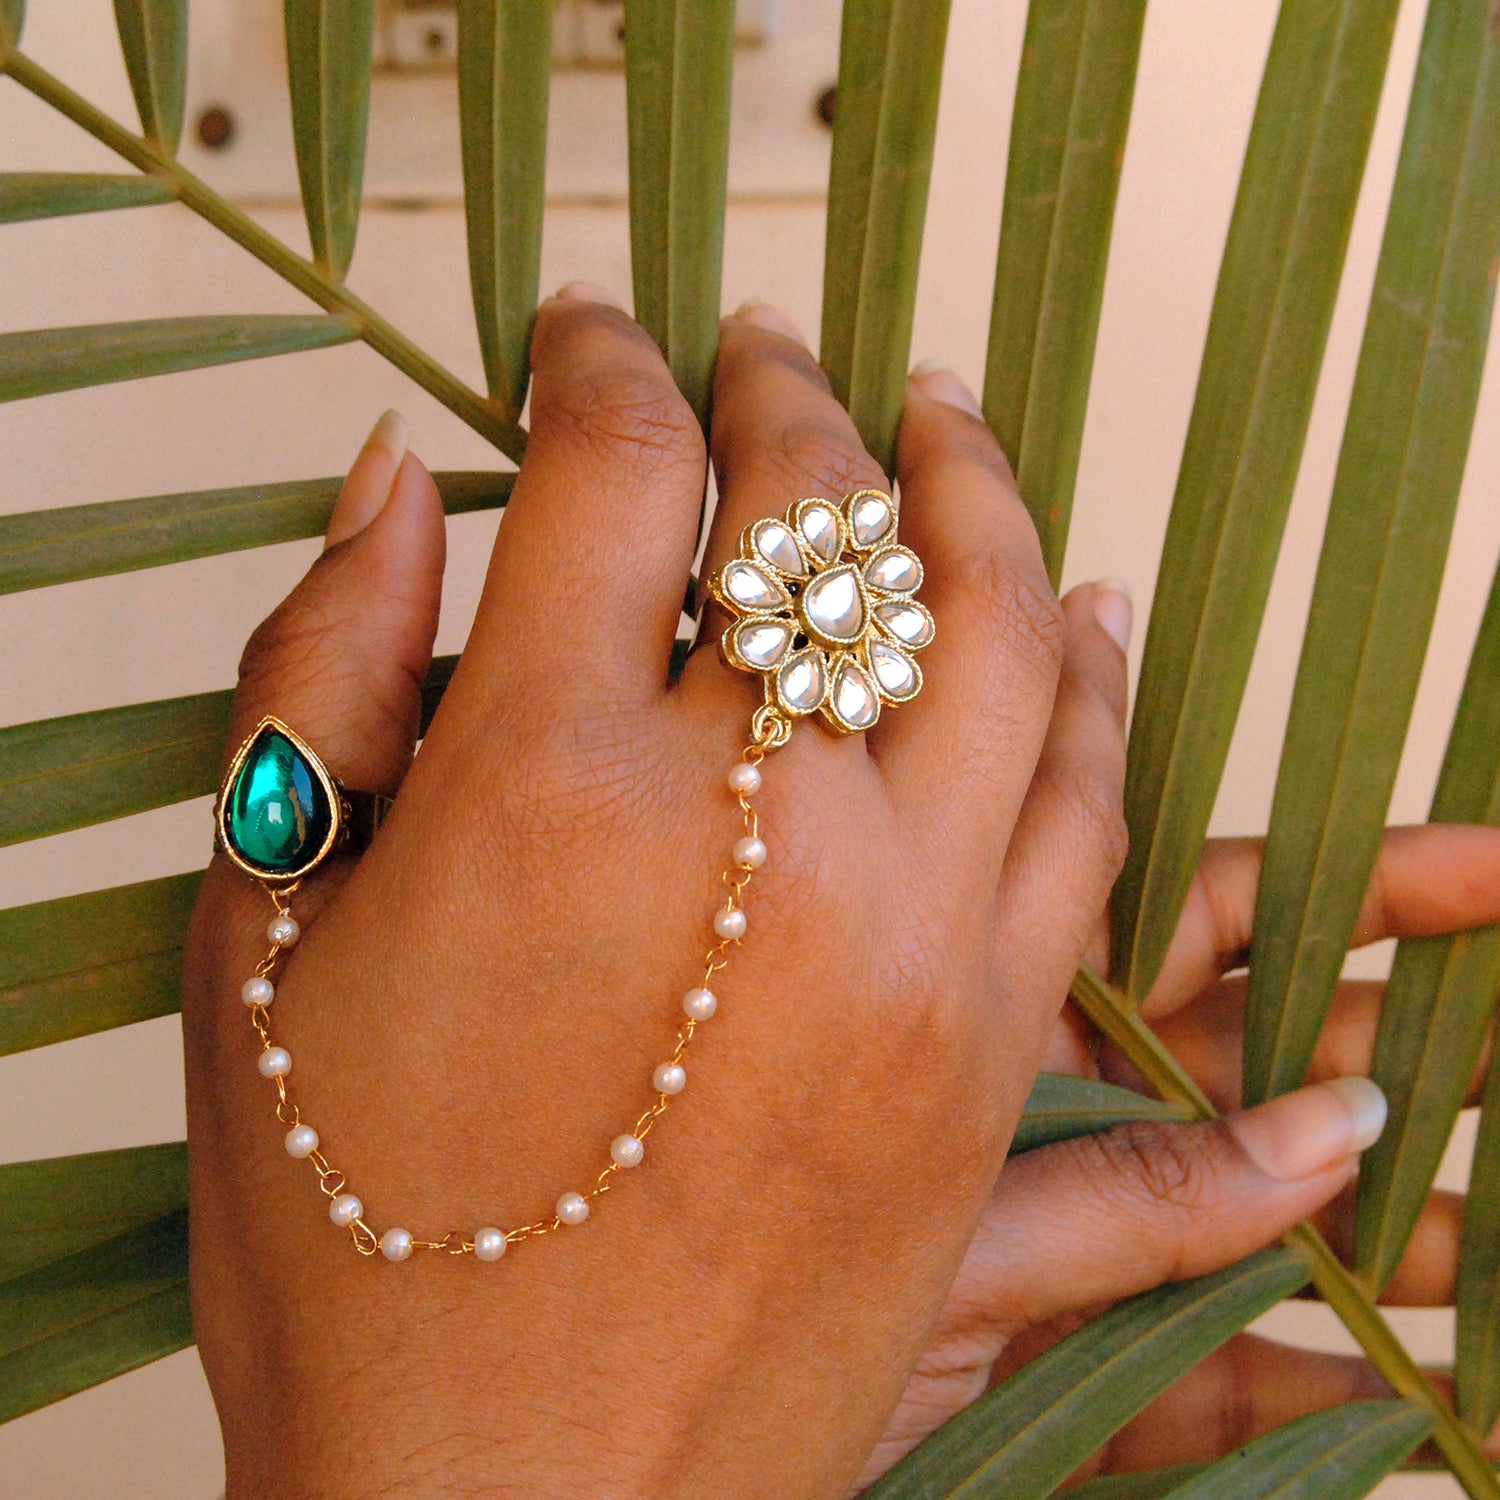 Beabhika Handmade Artificial Jewelry Adjustable Kundan Ring Gold Tone Two Finger Ring Adjustable Kundan Statement Rings Cocktail Easy To Wear Green Color Rings White Pearl Chain Ring Gold Tone Rings Available On COD In India Delhi Traditional Heeramandi Style Jewelry